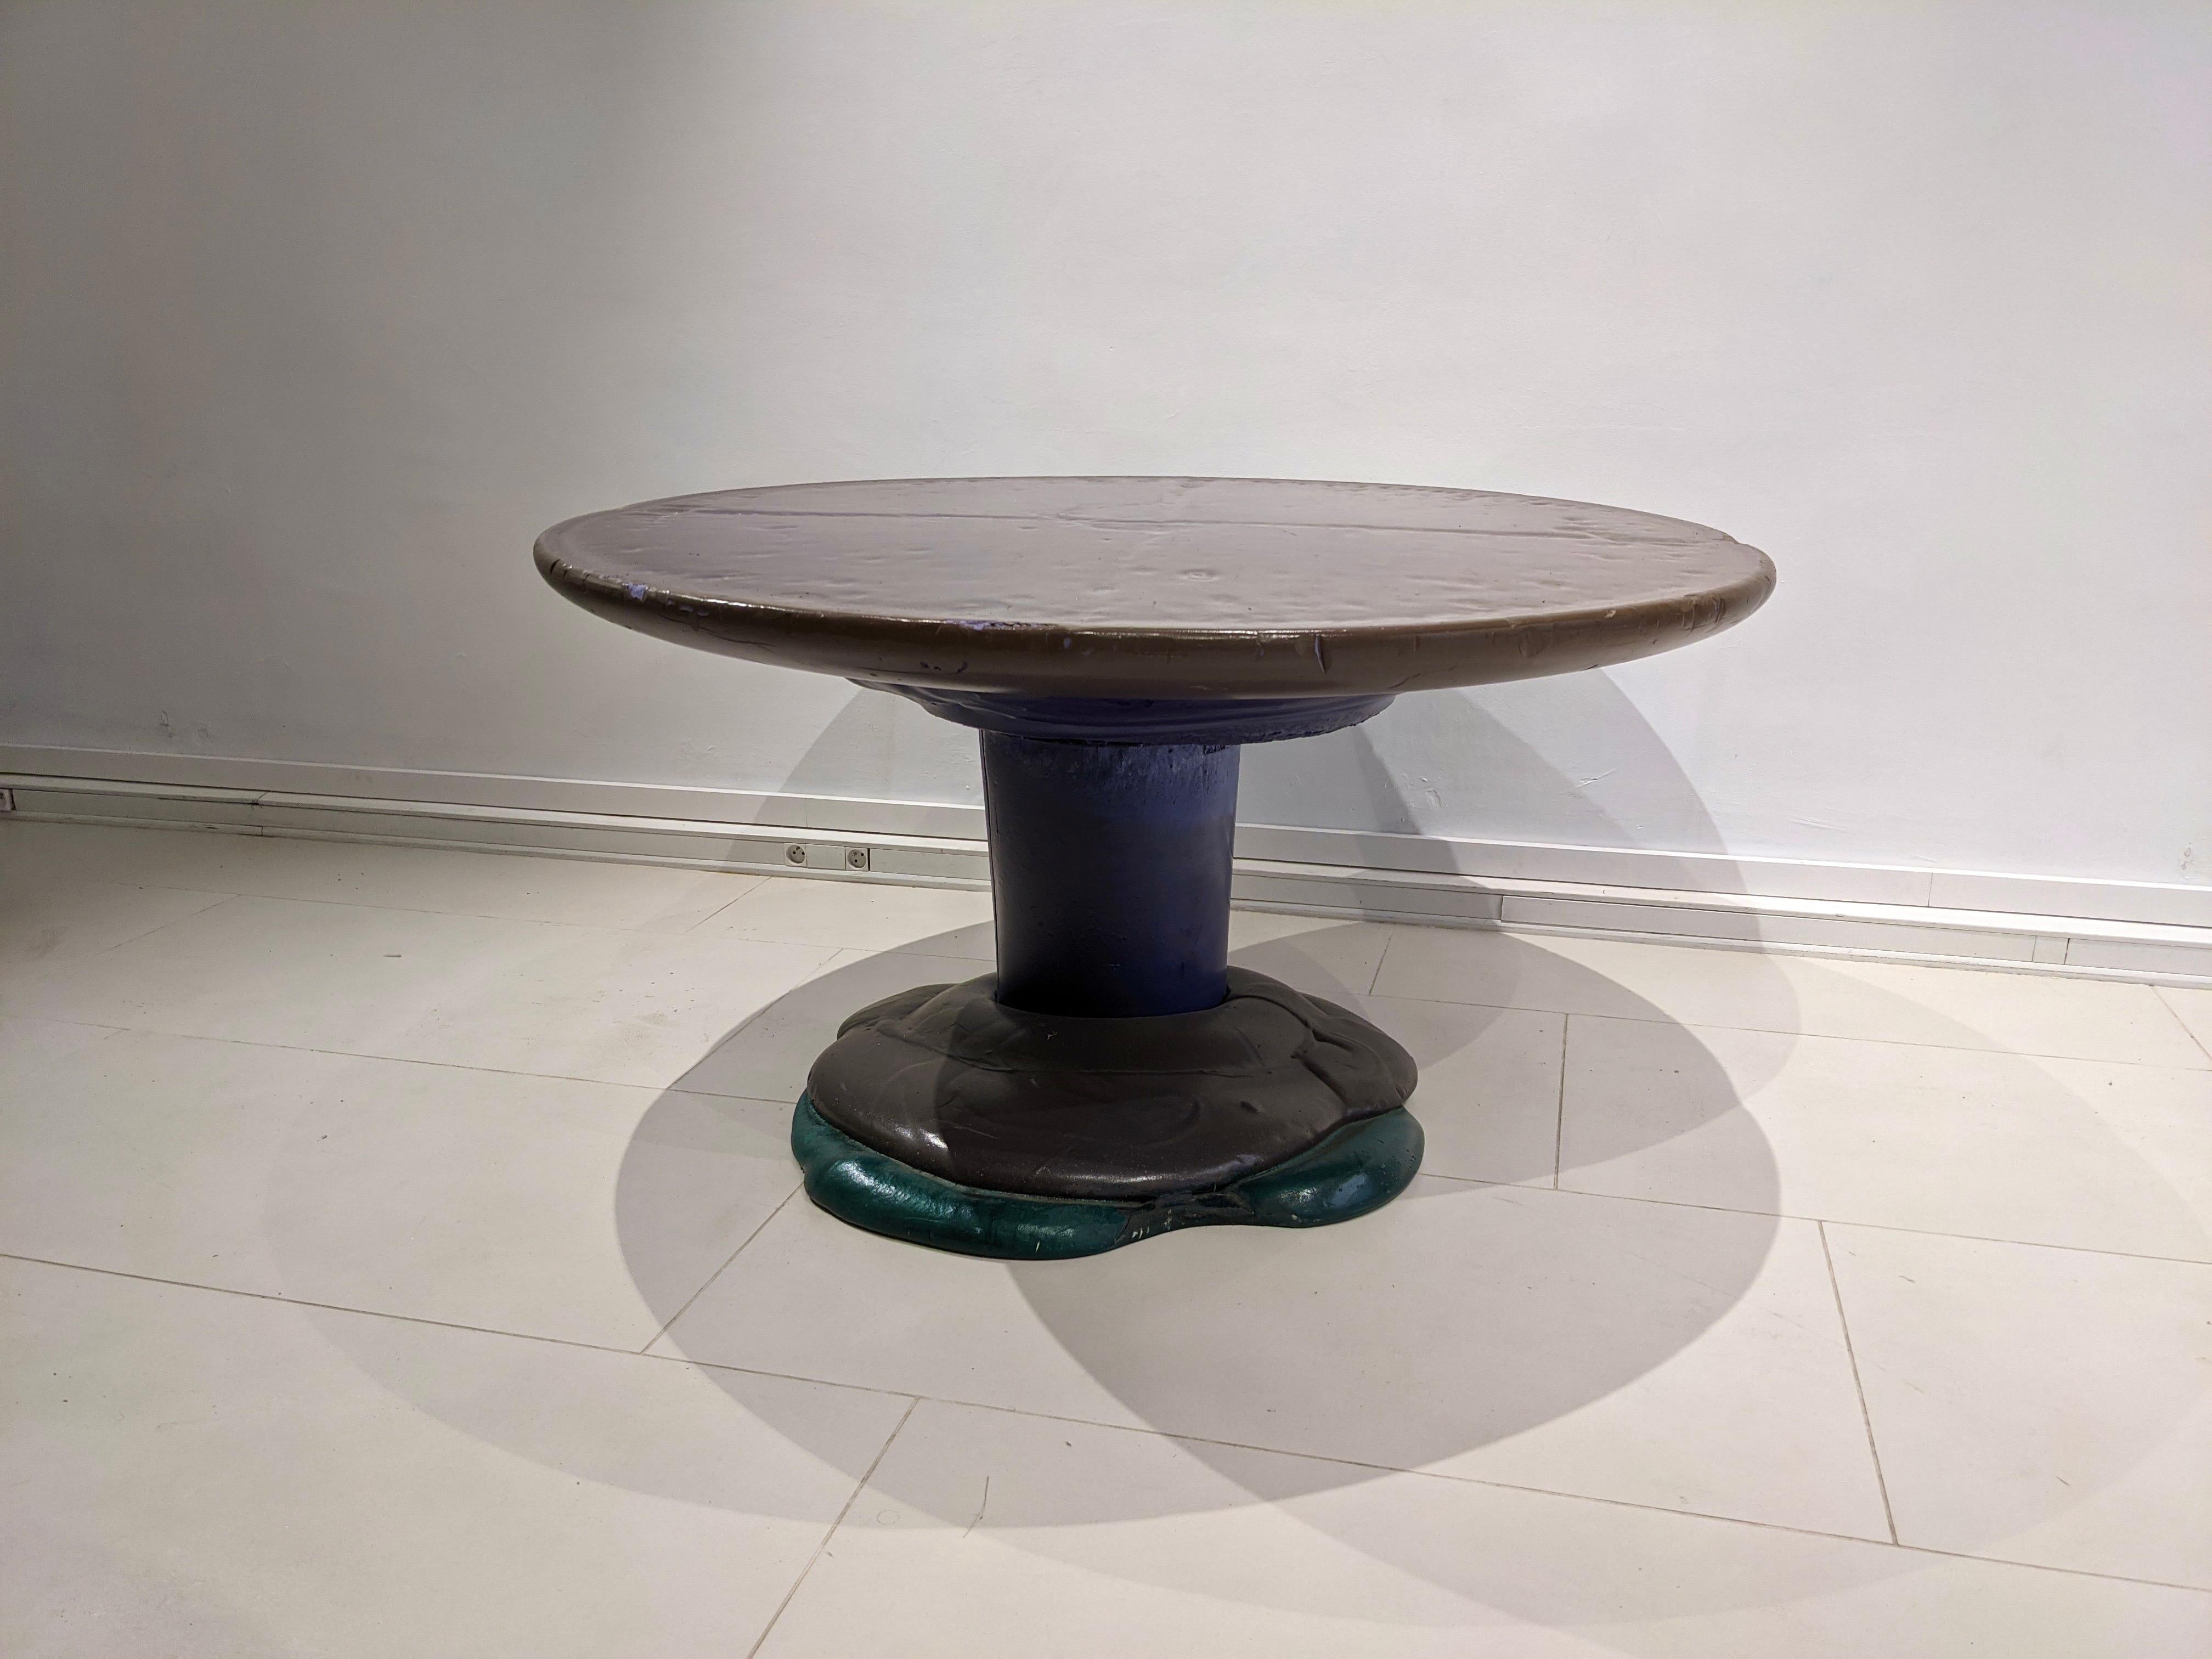 Dinner table by Louis Durot. Polyurethane resin of different colors : emerald, purple and grey. 2000s. Good condition. Some traces of wear, evident on the photos.
Dimensions : H76 cm x D146 cm.
 